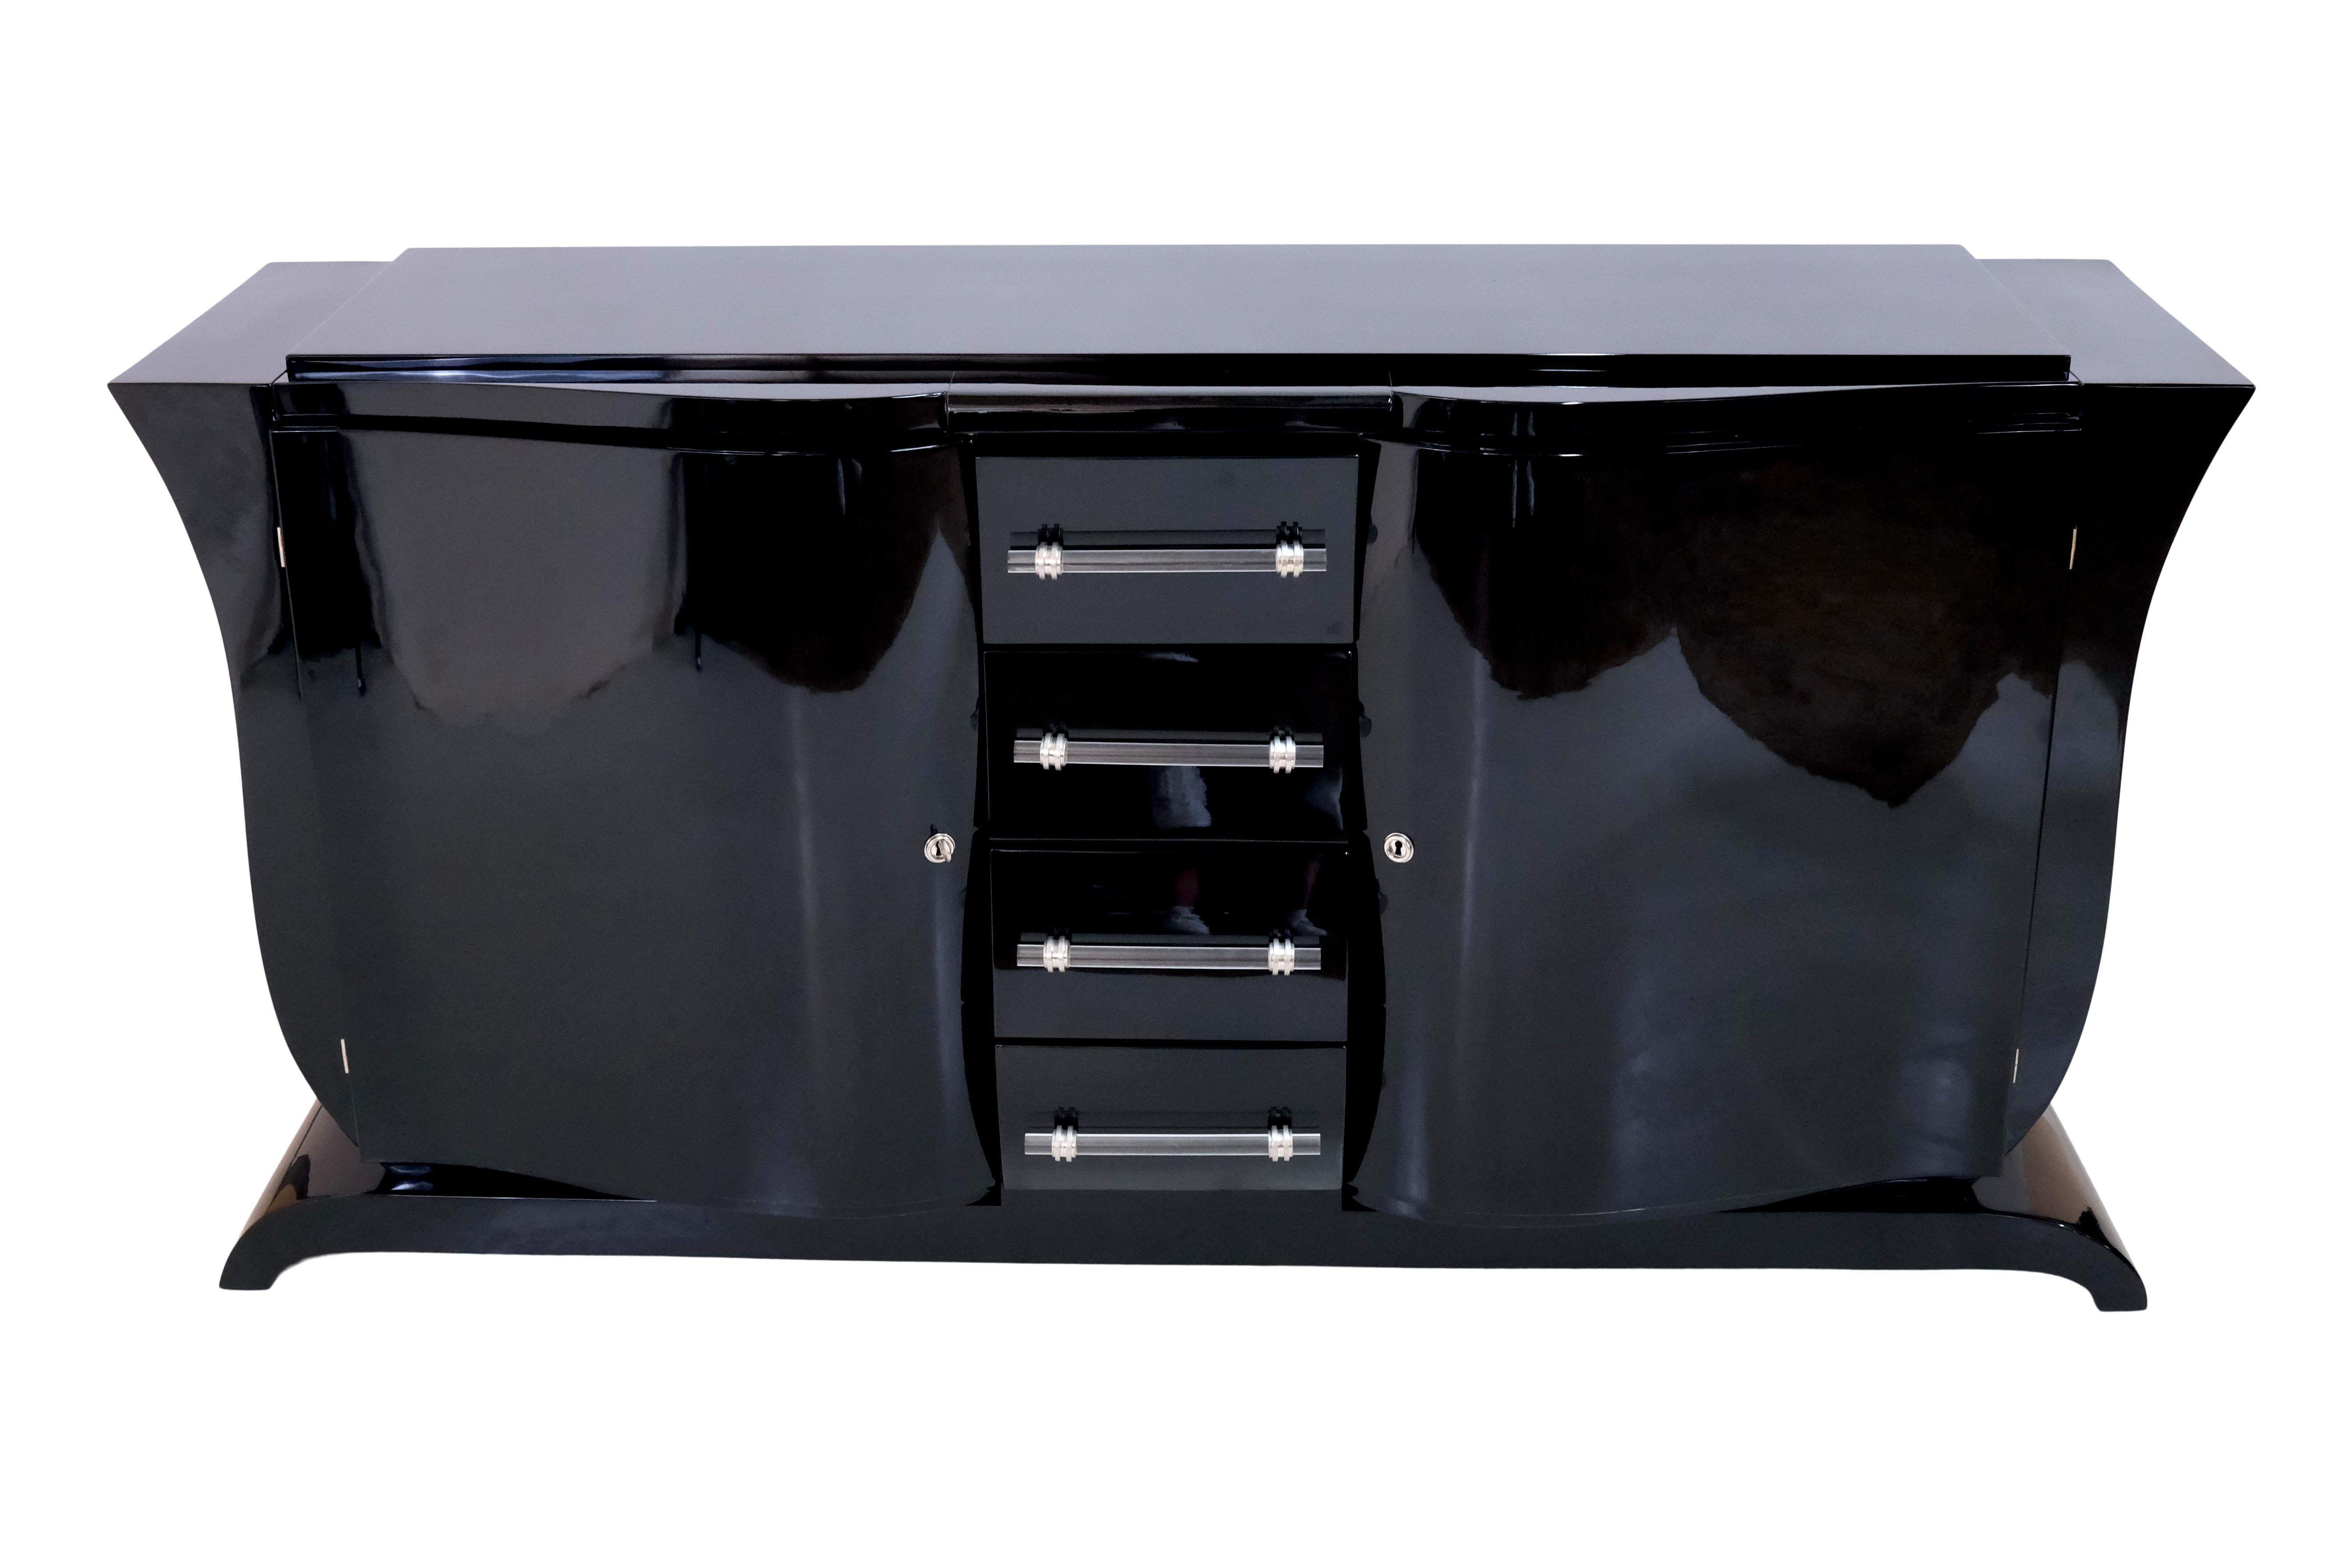 Sideboard with curved sides in typical shape.
The front is also curved both horizontally and vertically

Furniture in Black Lacquer, high gloss 

Two hinged doors,
drawers in the middle part,
Glass handles

Original Art Deco, France 1930s 

The